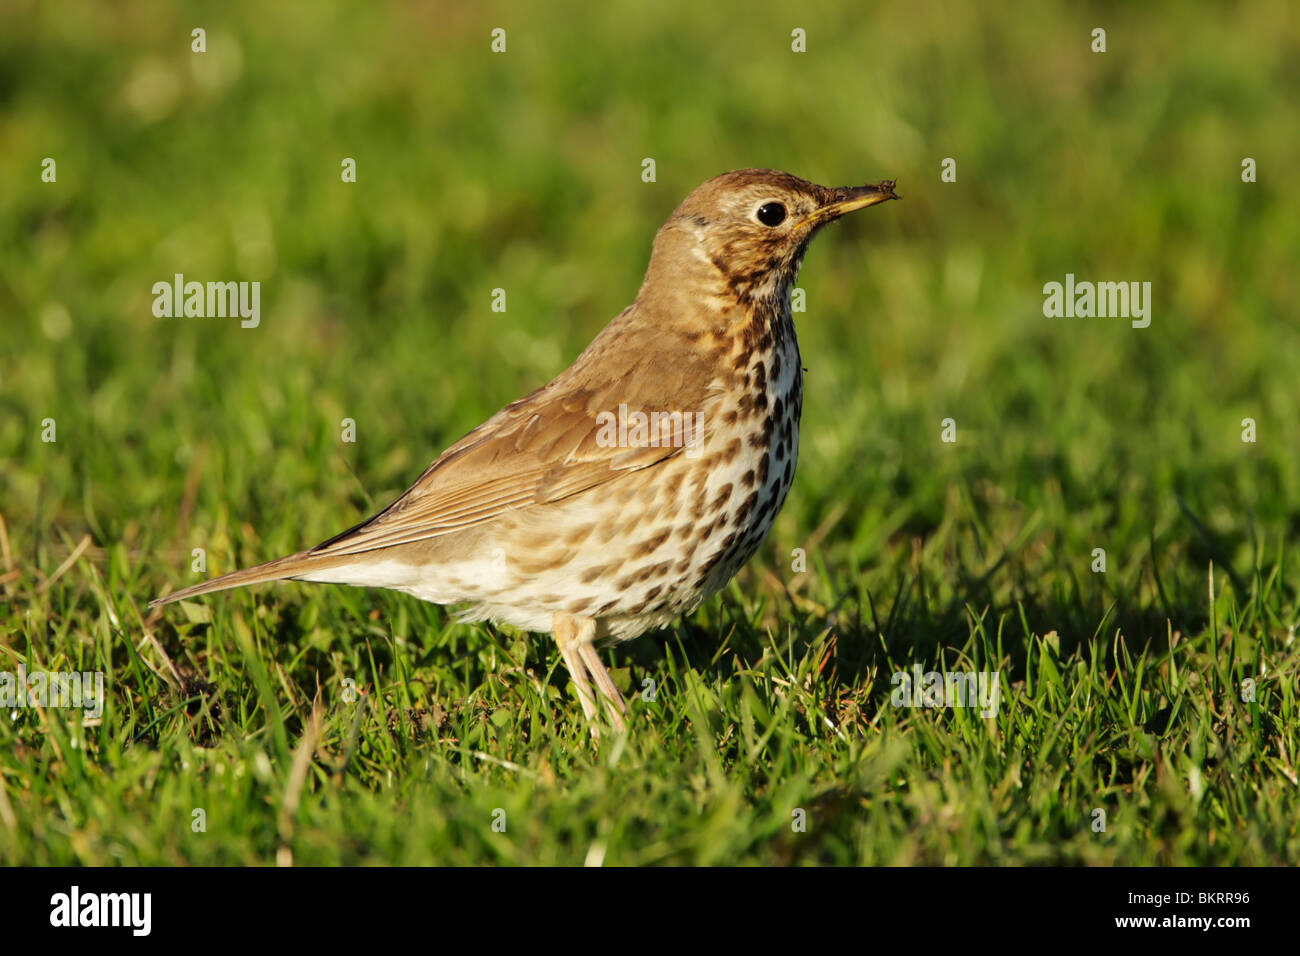 Song thrush (Turdus philomelos) standing on grass with mud on beak from foraging Stock Photo